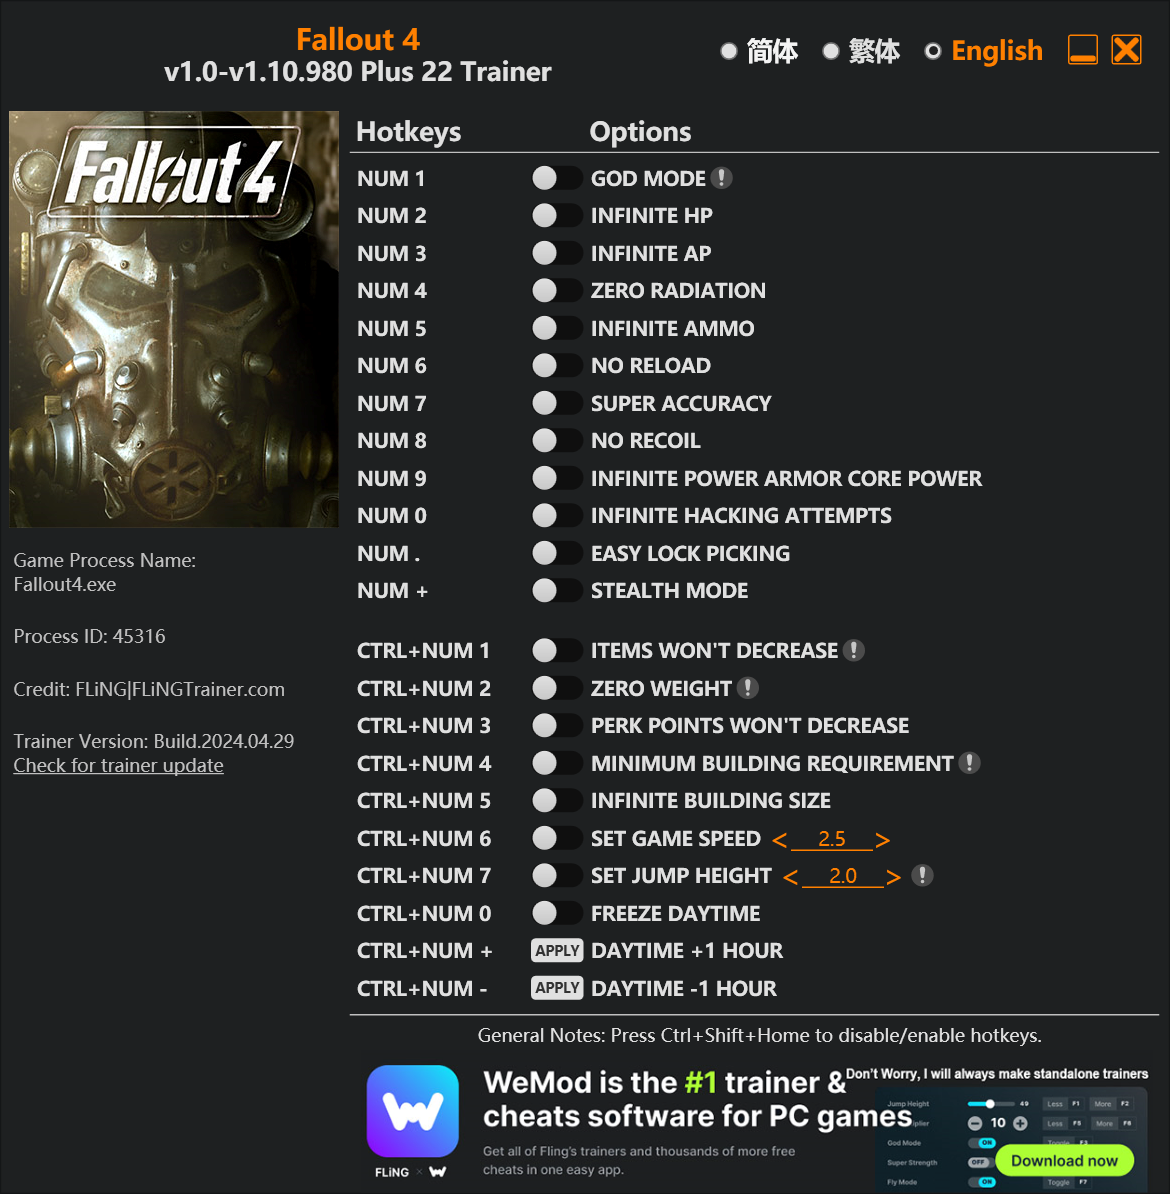 Fallout 4 Trainer/Cheat